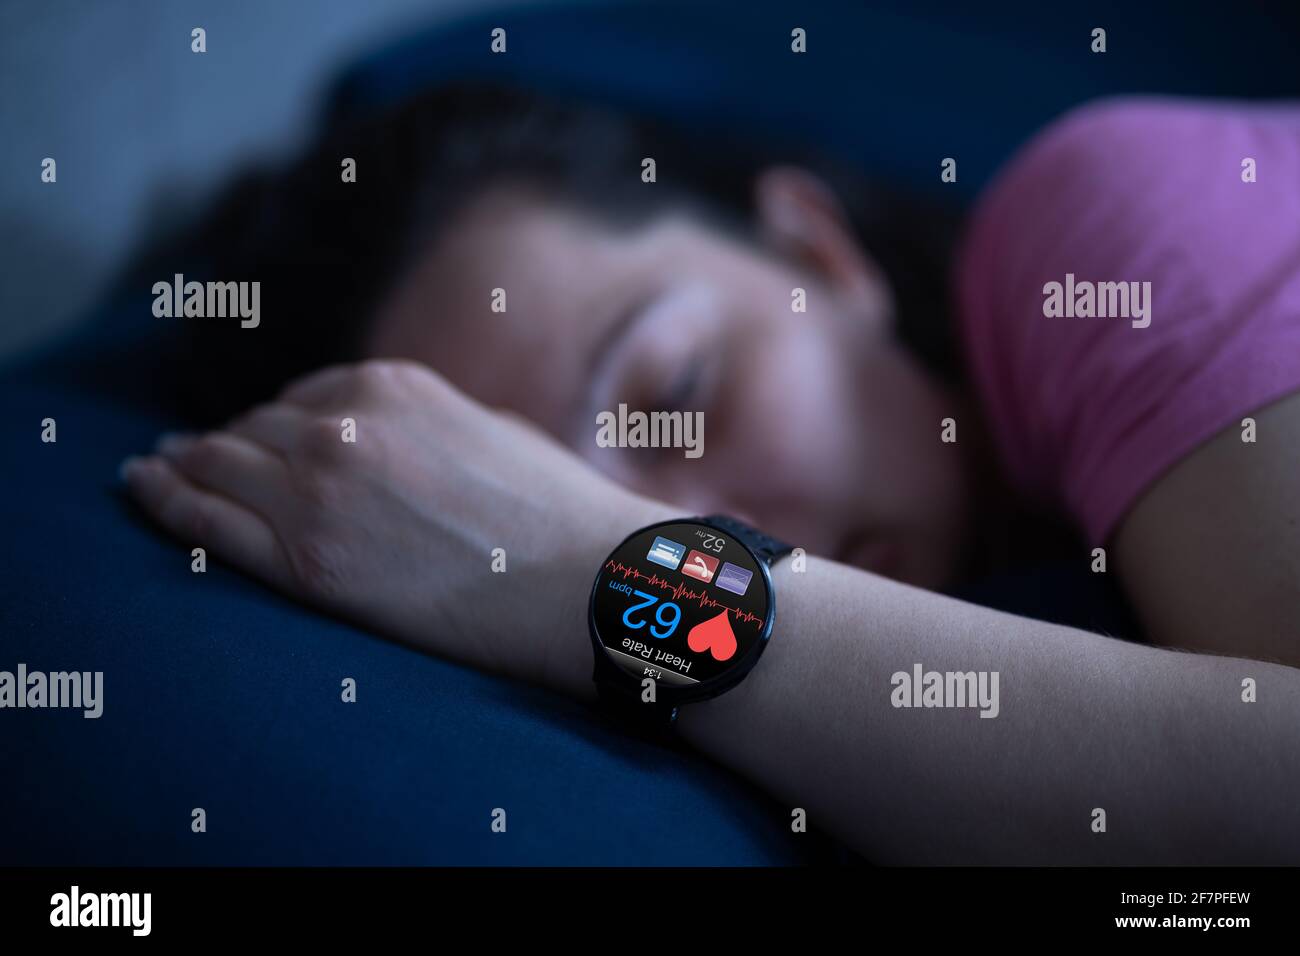 Wearable Sleep Tracking Heart Rate Monitor Smartwatch In Bed Stock Photo